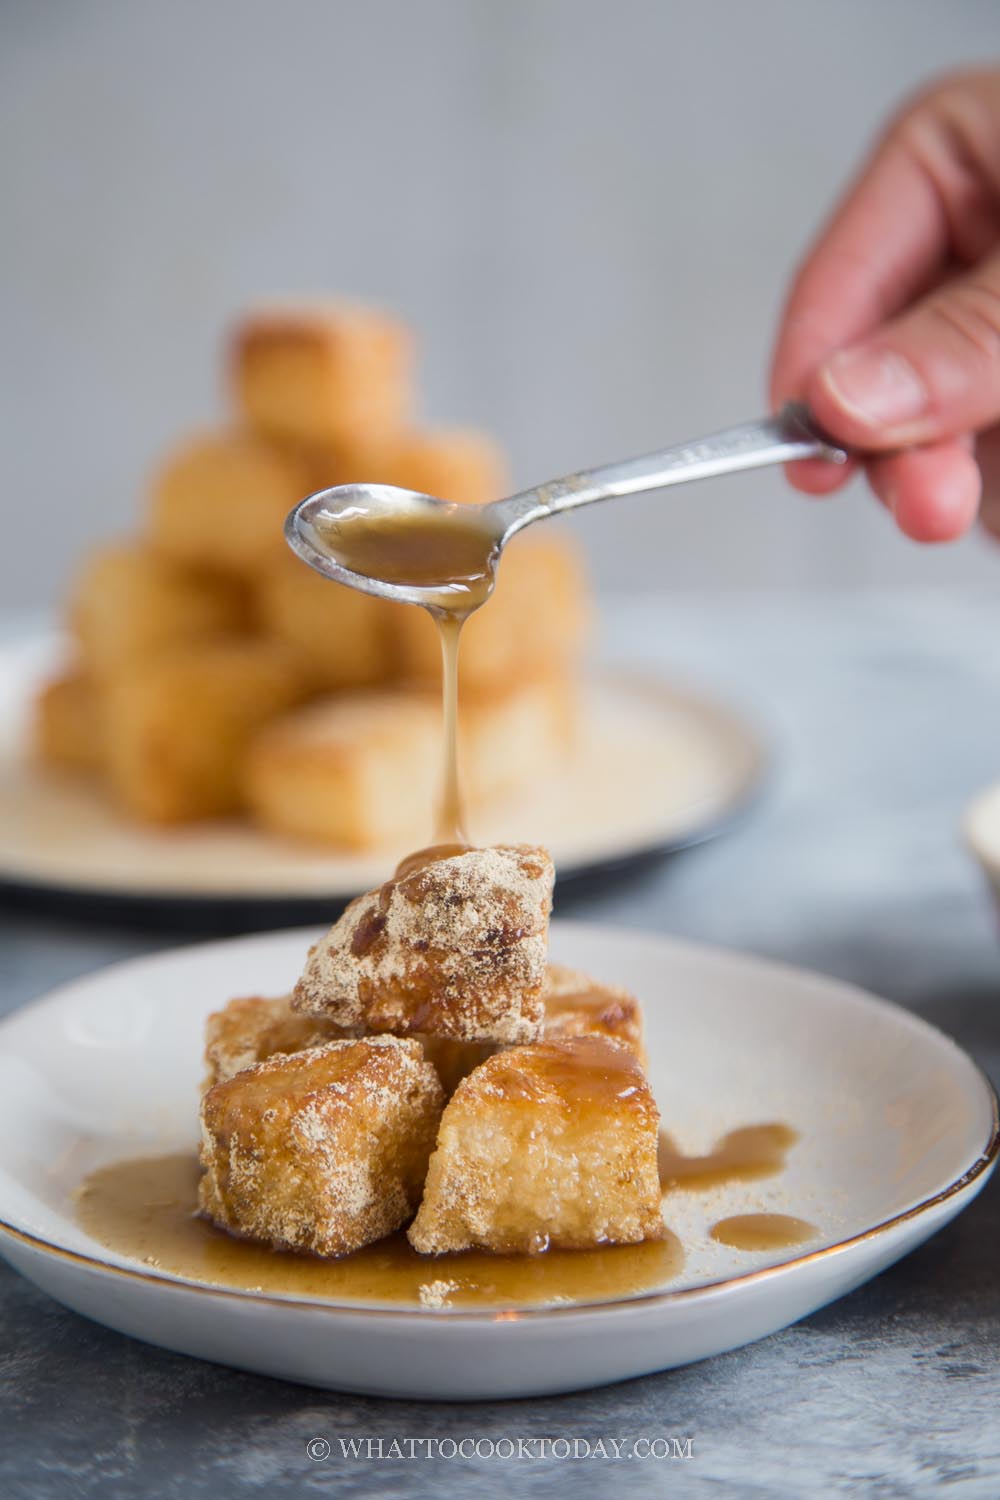 Fried Pounded Glutinous Rice Cake with Brown Sugar Syrup (Hong Tang Ci Ba)